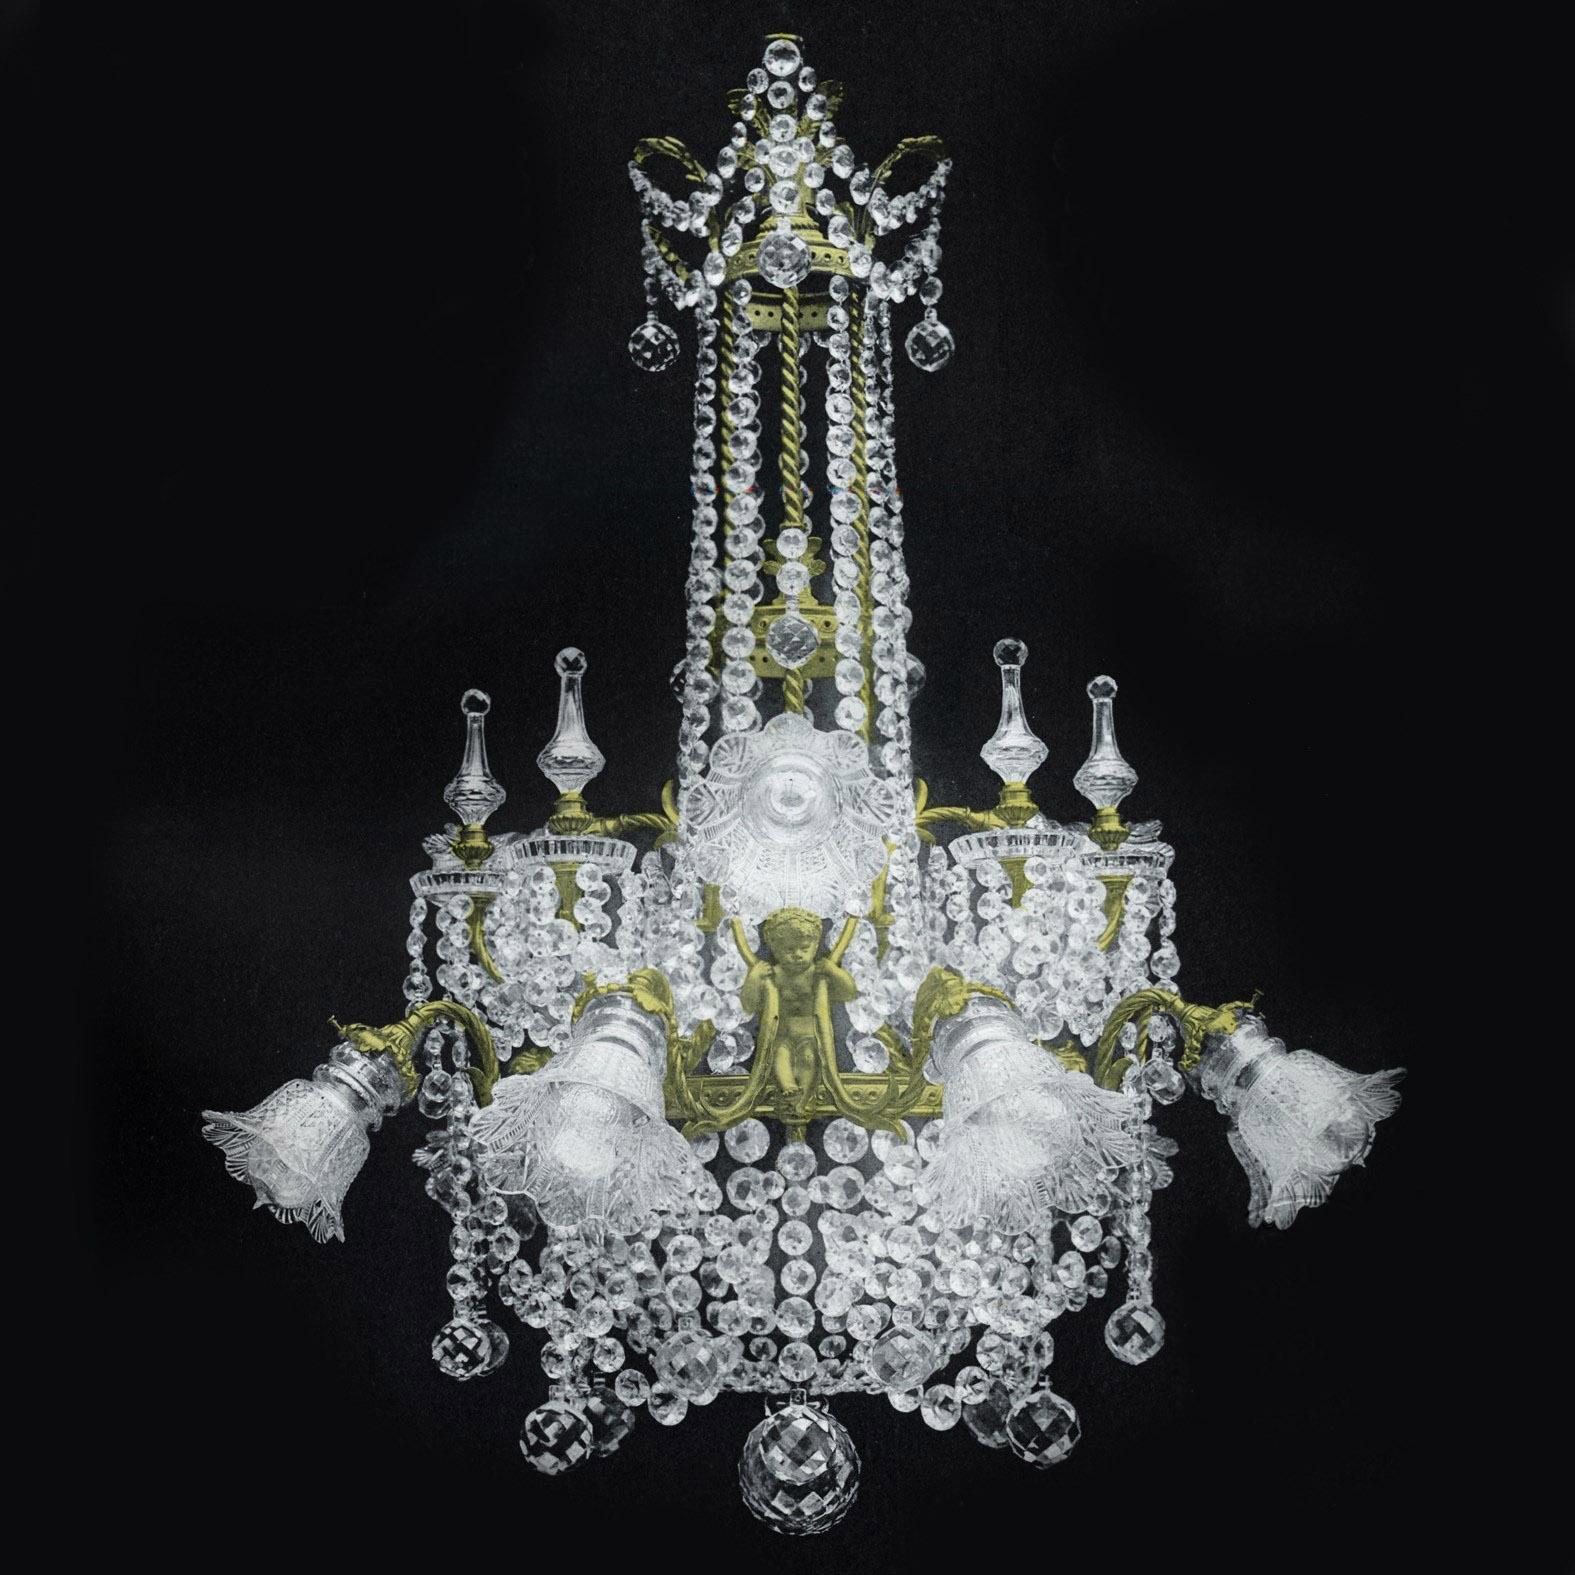 Exquisite Late 19th Century Gilt Bronze and Crystal Chandelier by Baccarat For Sale 5